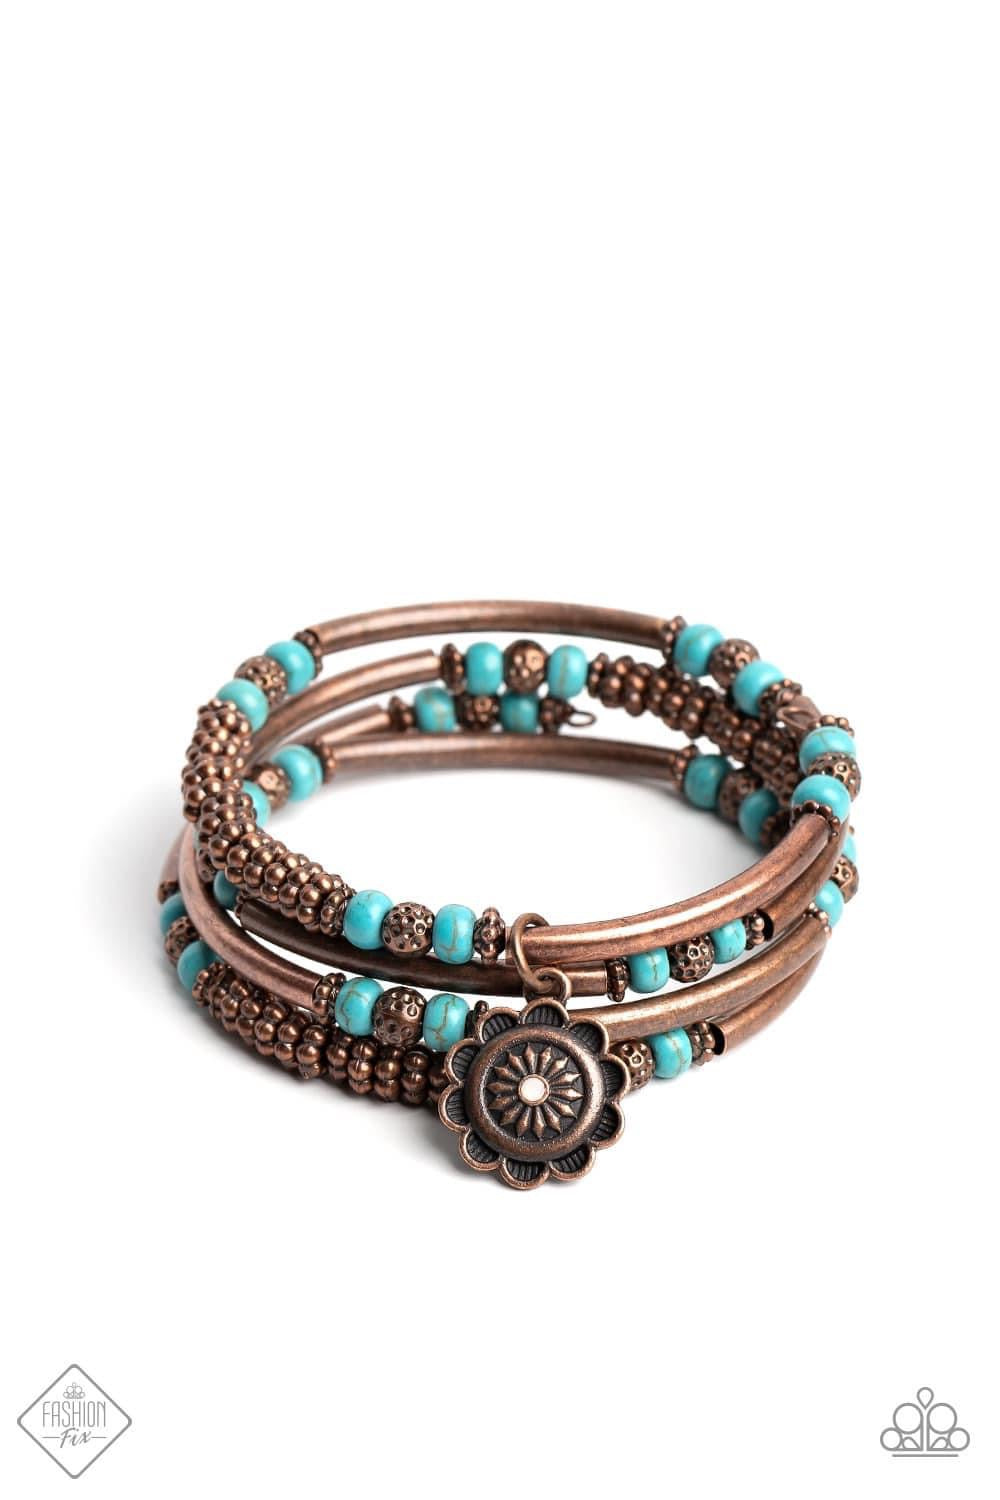 Paparazzi Accessories Simply Santa Fe: February 2023 Authentic designs and handcrafted pieces are staples of the Simply Santa Fe Collection. Featuring patterns and elements inspired by nature, these earthy designs tend to have a little more detail. Those